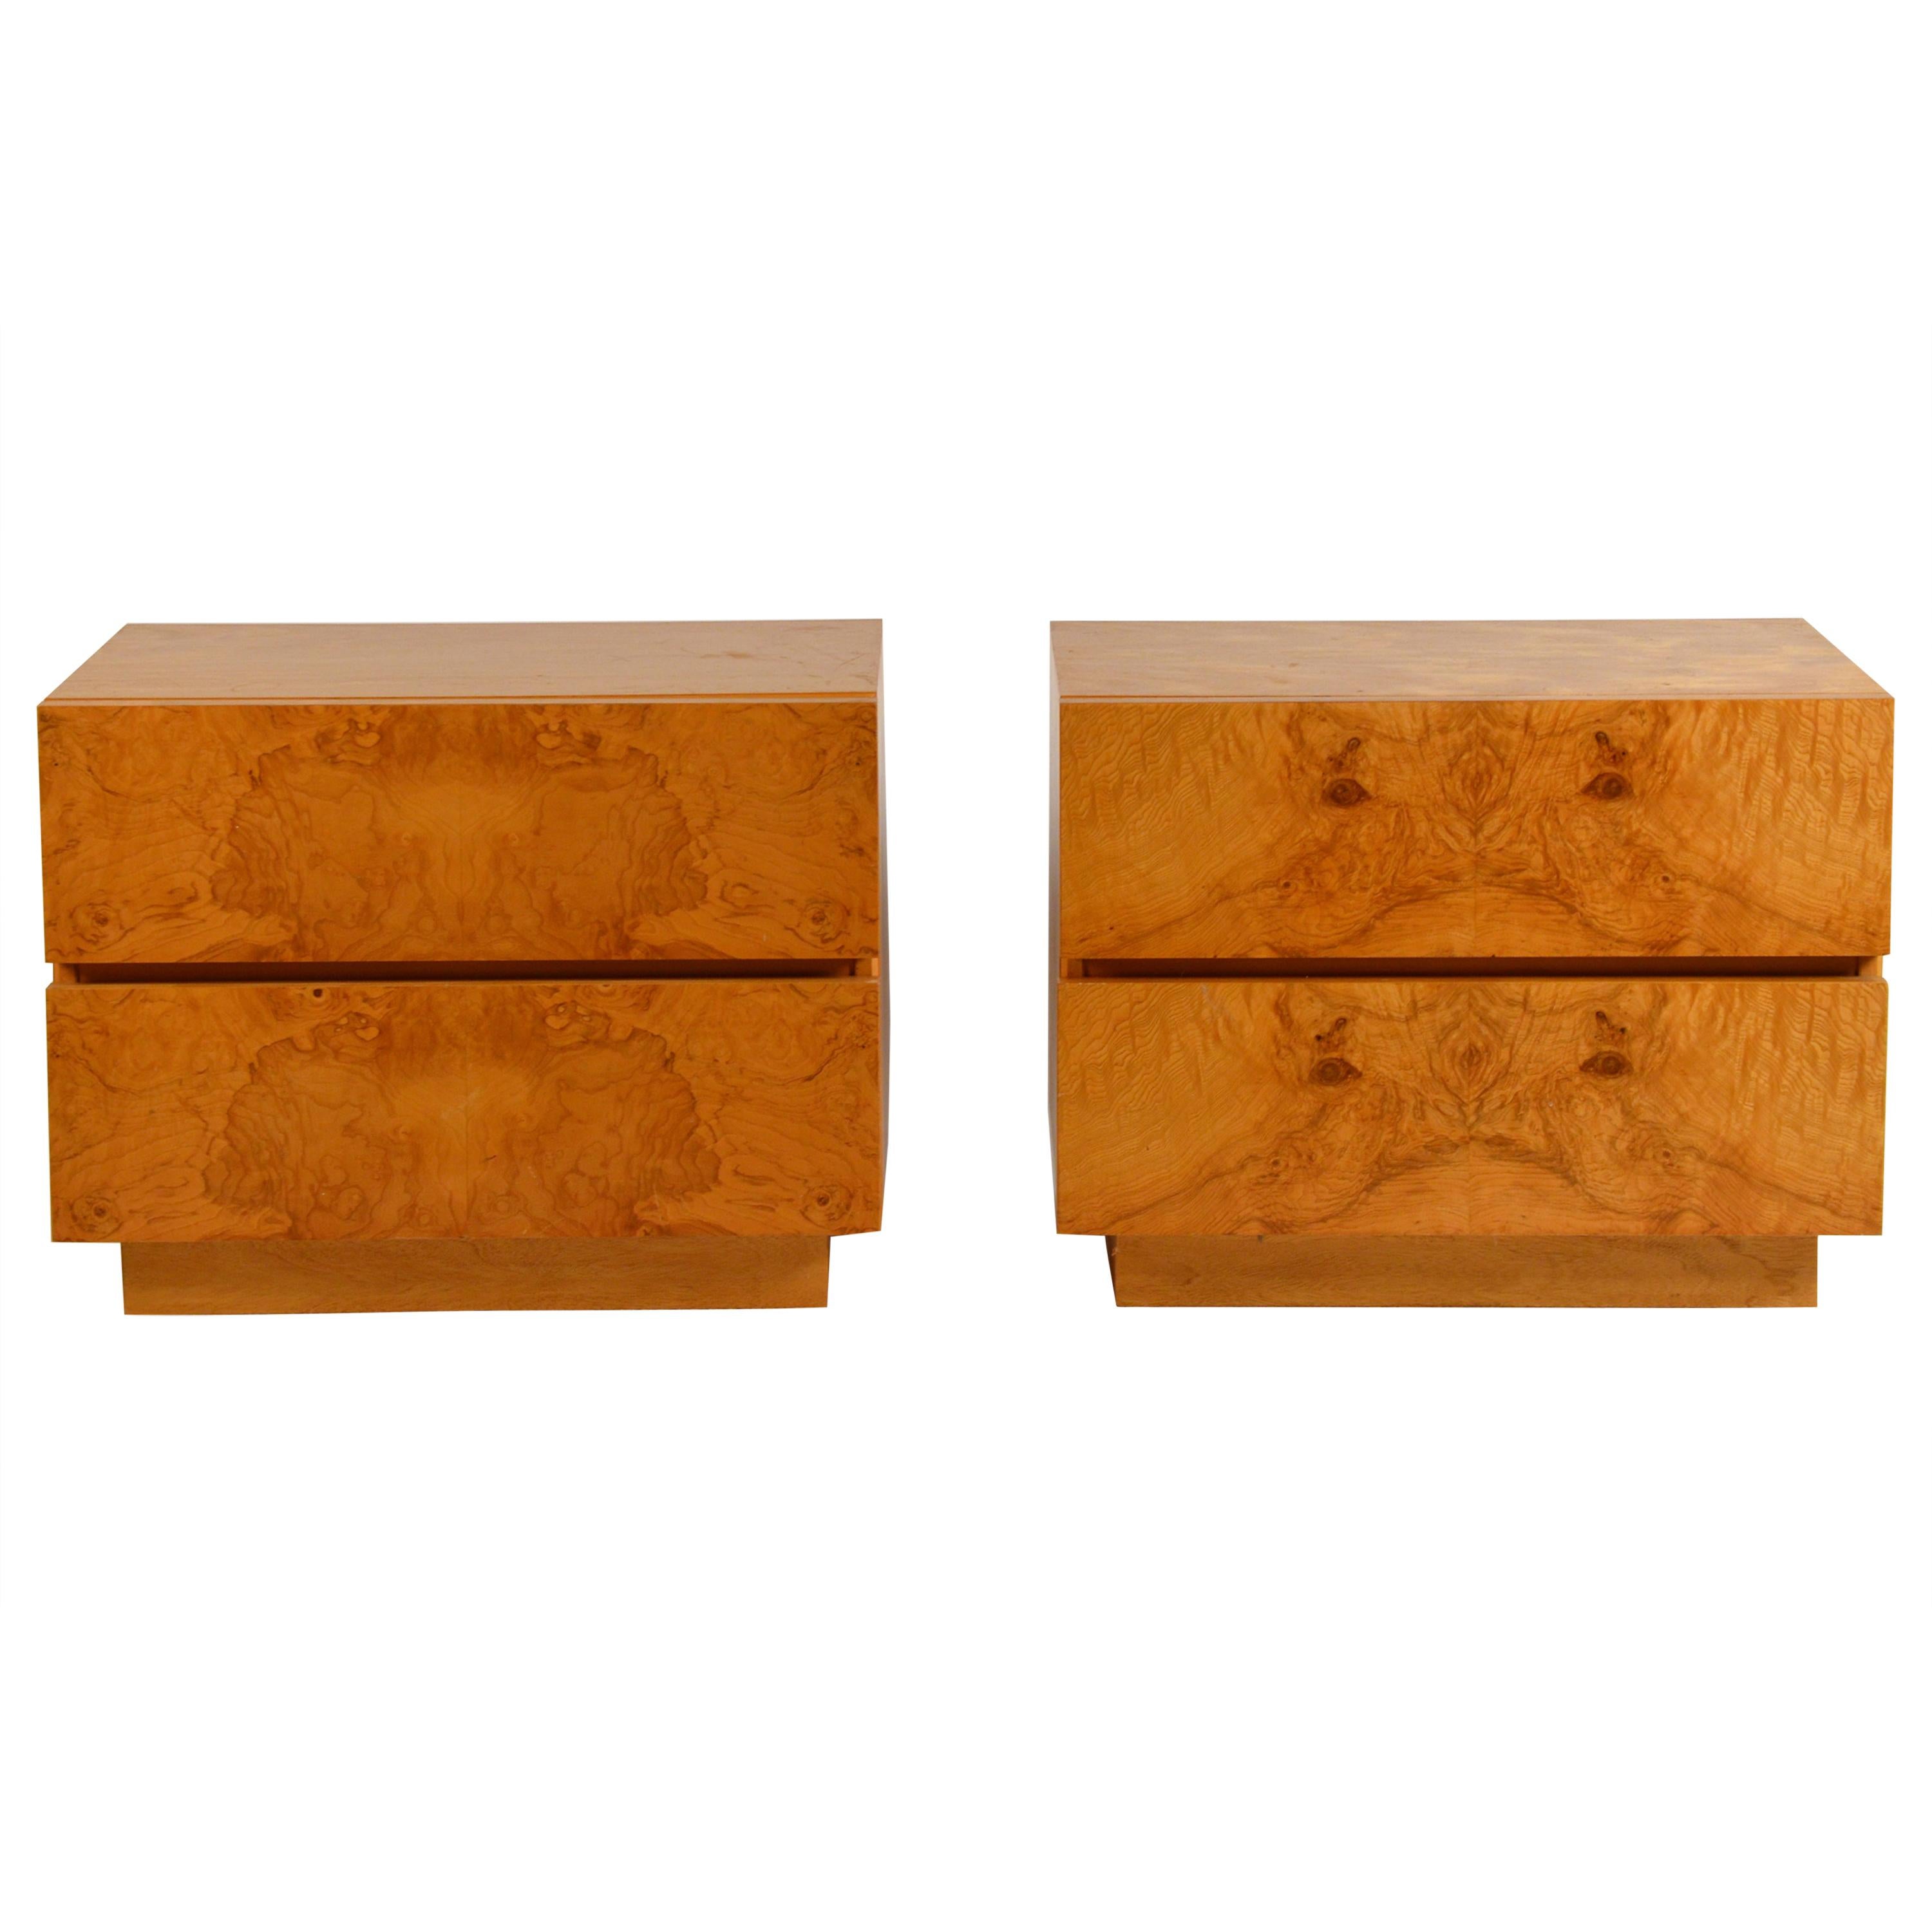 Pair of Minimalist 'Amboine' Burl Wood Nightstands by Design Frères For Sale